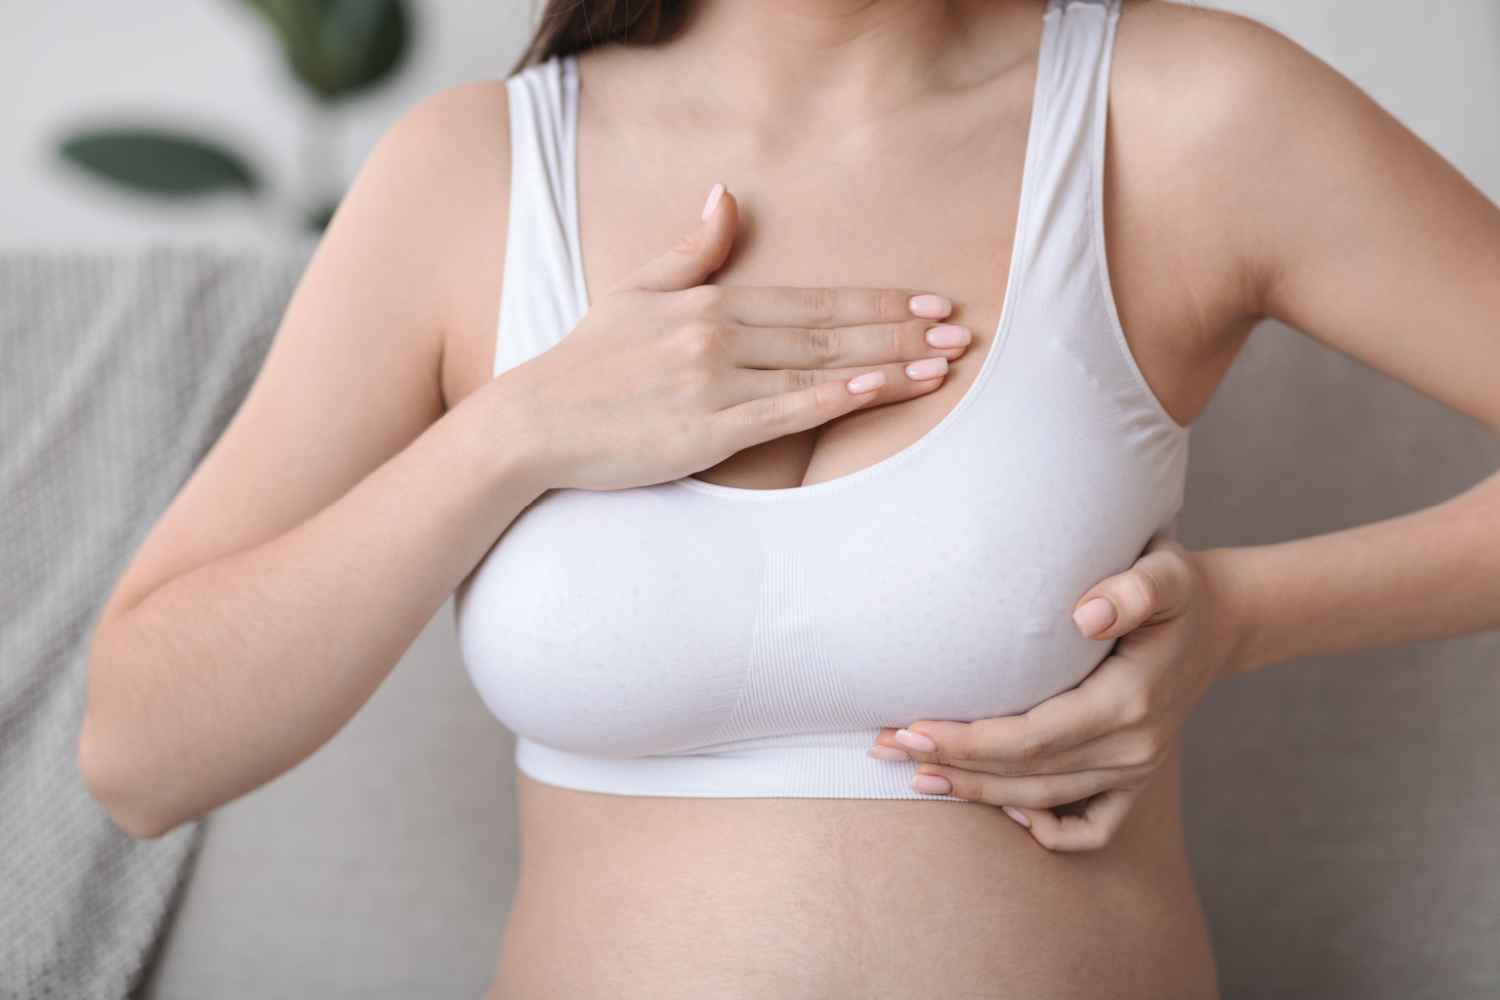 Pregnant woman checking her breasts